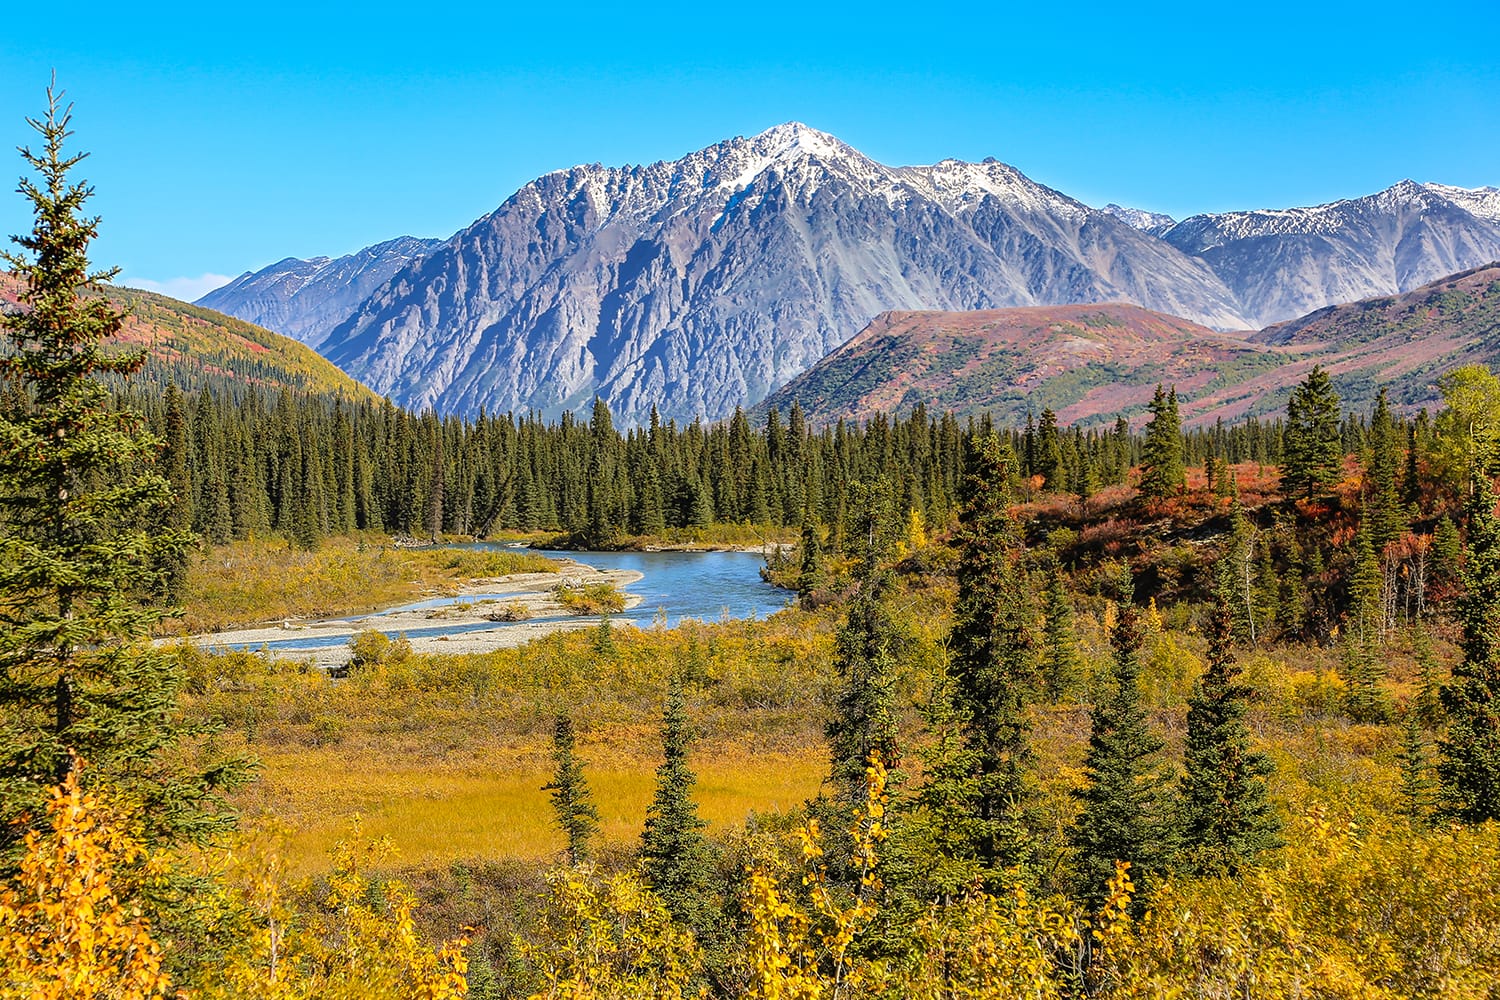 Scenic fall landscape with snow-capped mountains in Denali National Park, Alaska